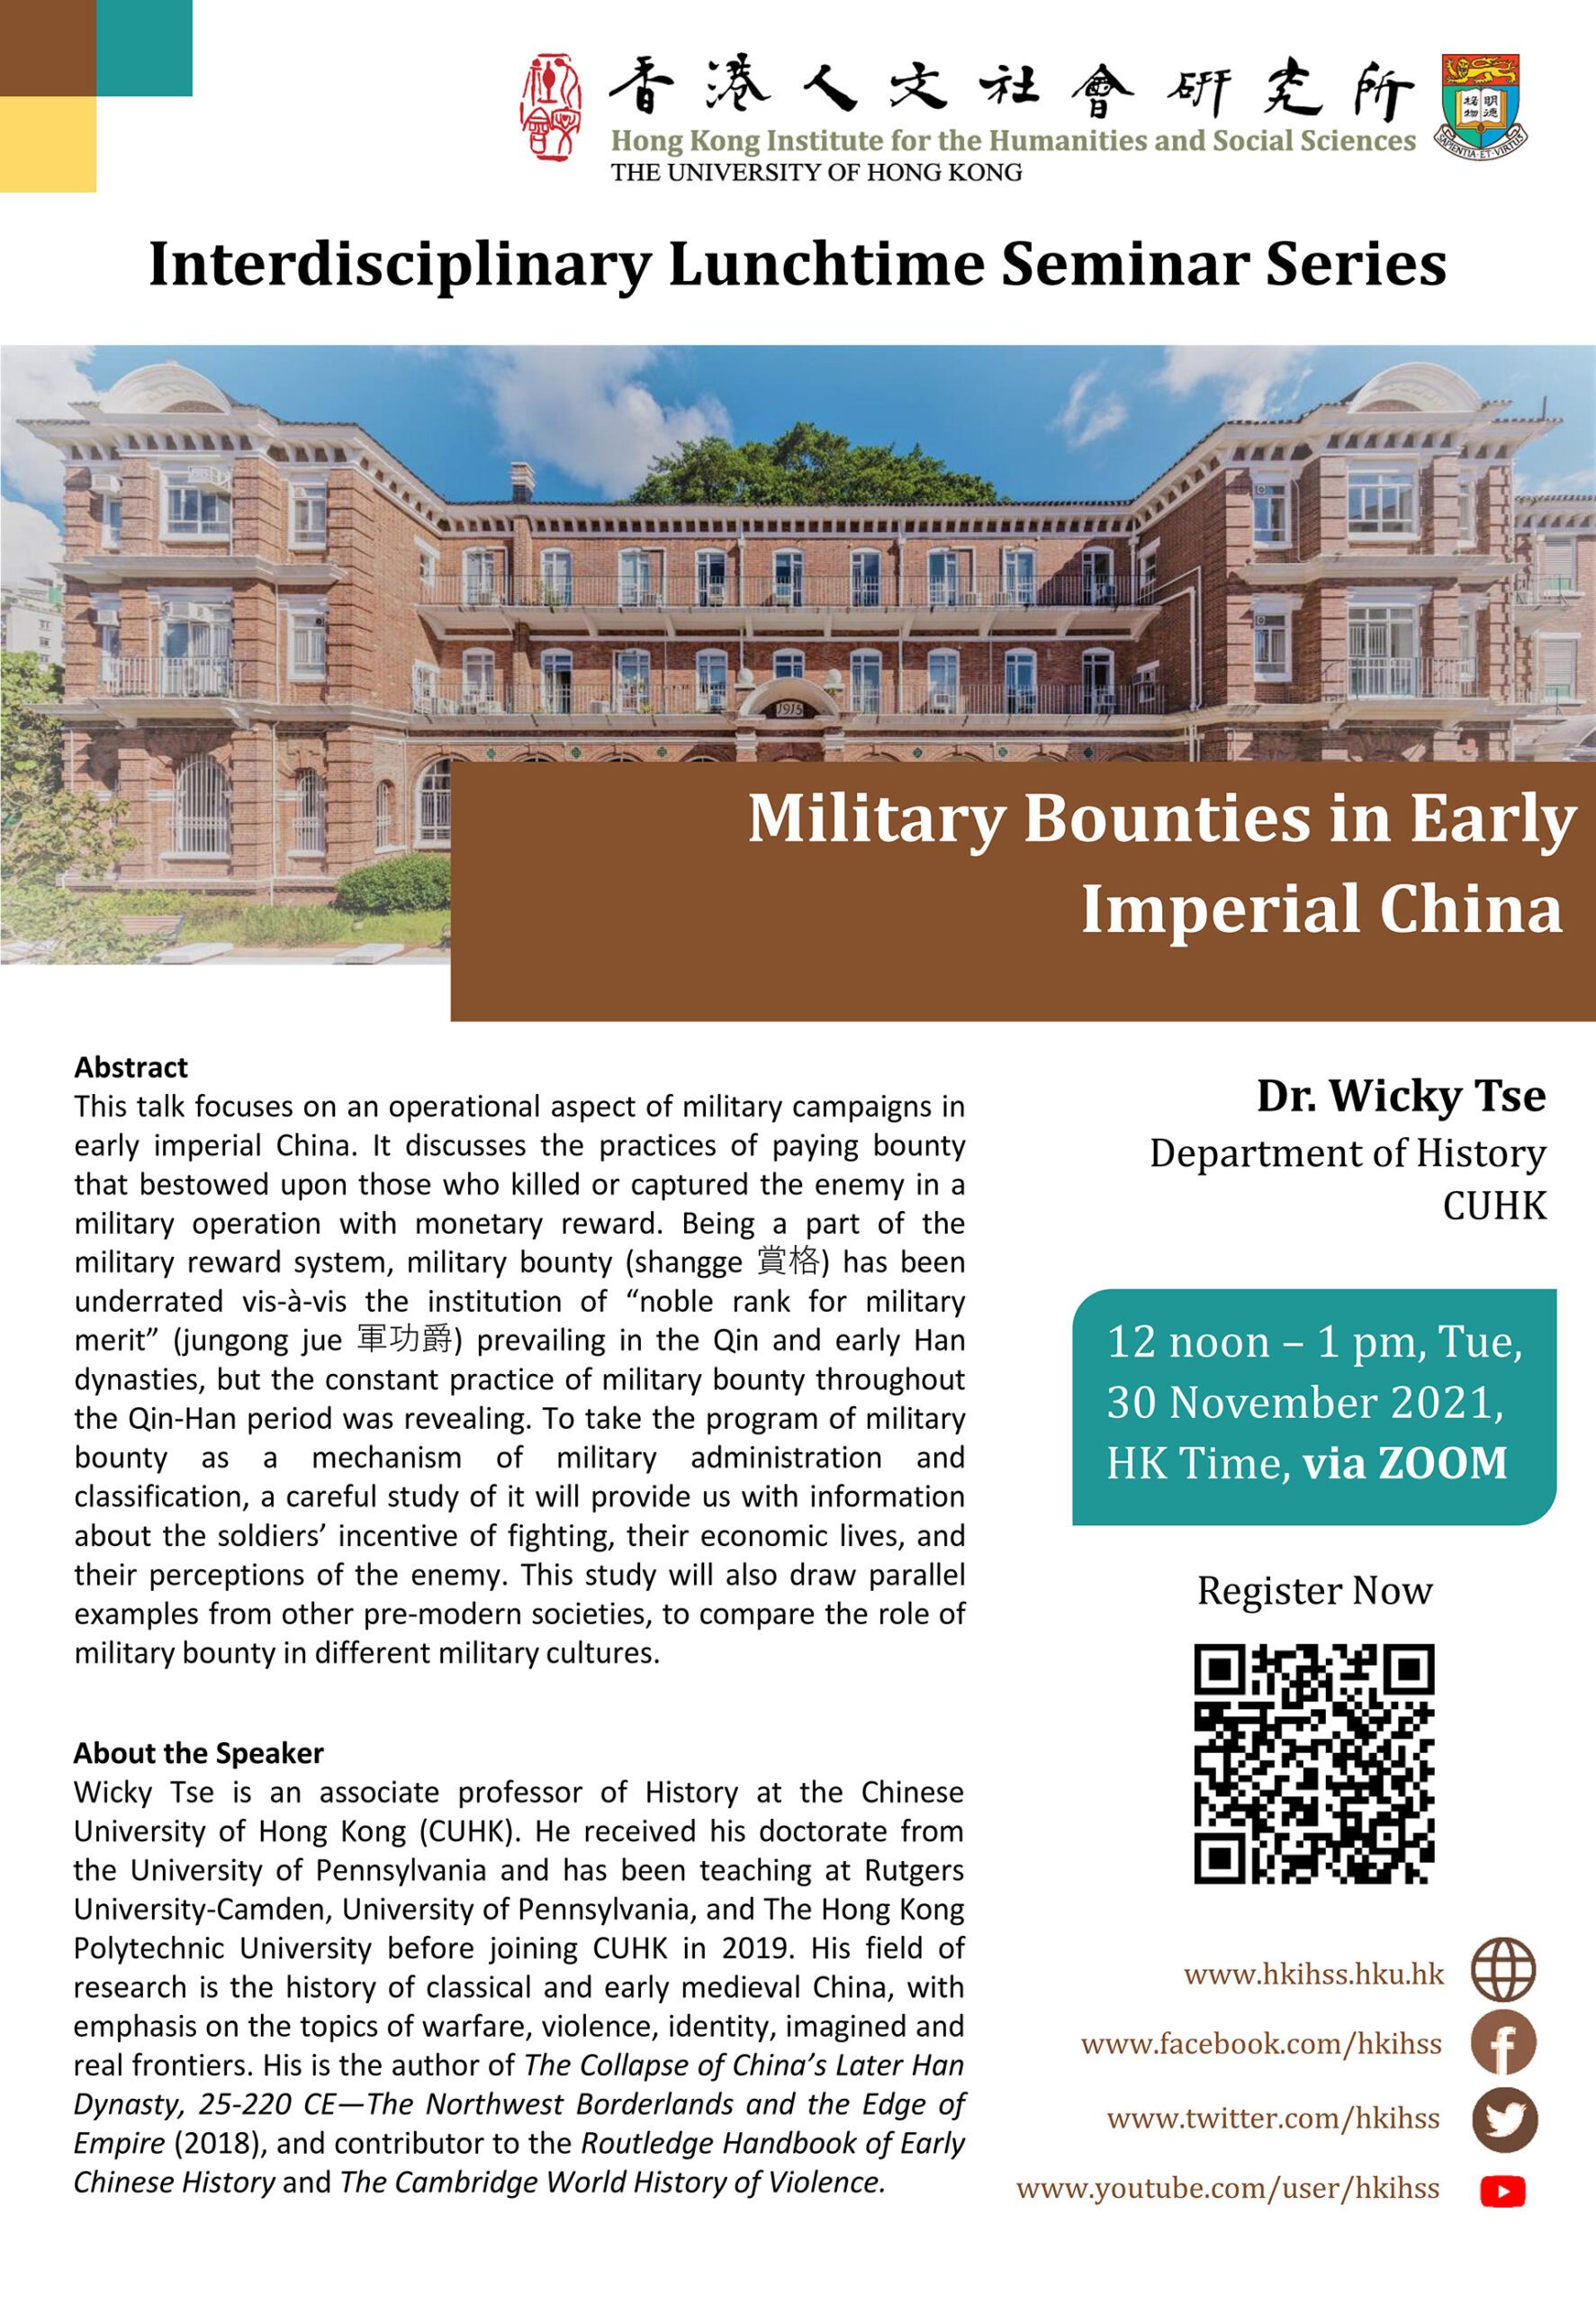 Interdisciplinary Lunchtime Seminar on “Military Bounties in Early Imperial China” by Dr. Wicky Tse (November 30, 2021)